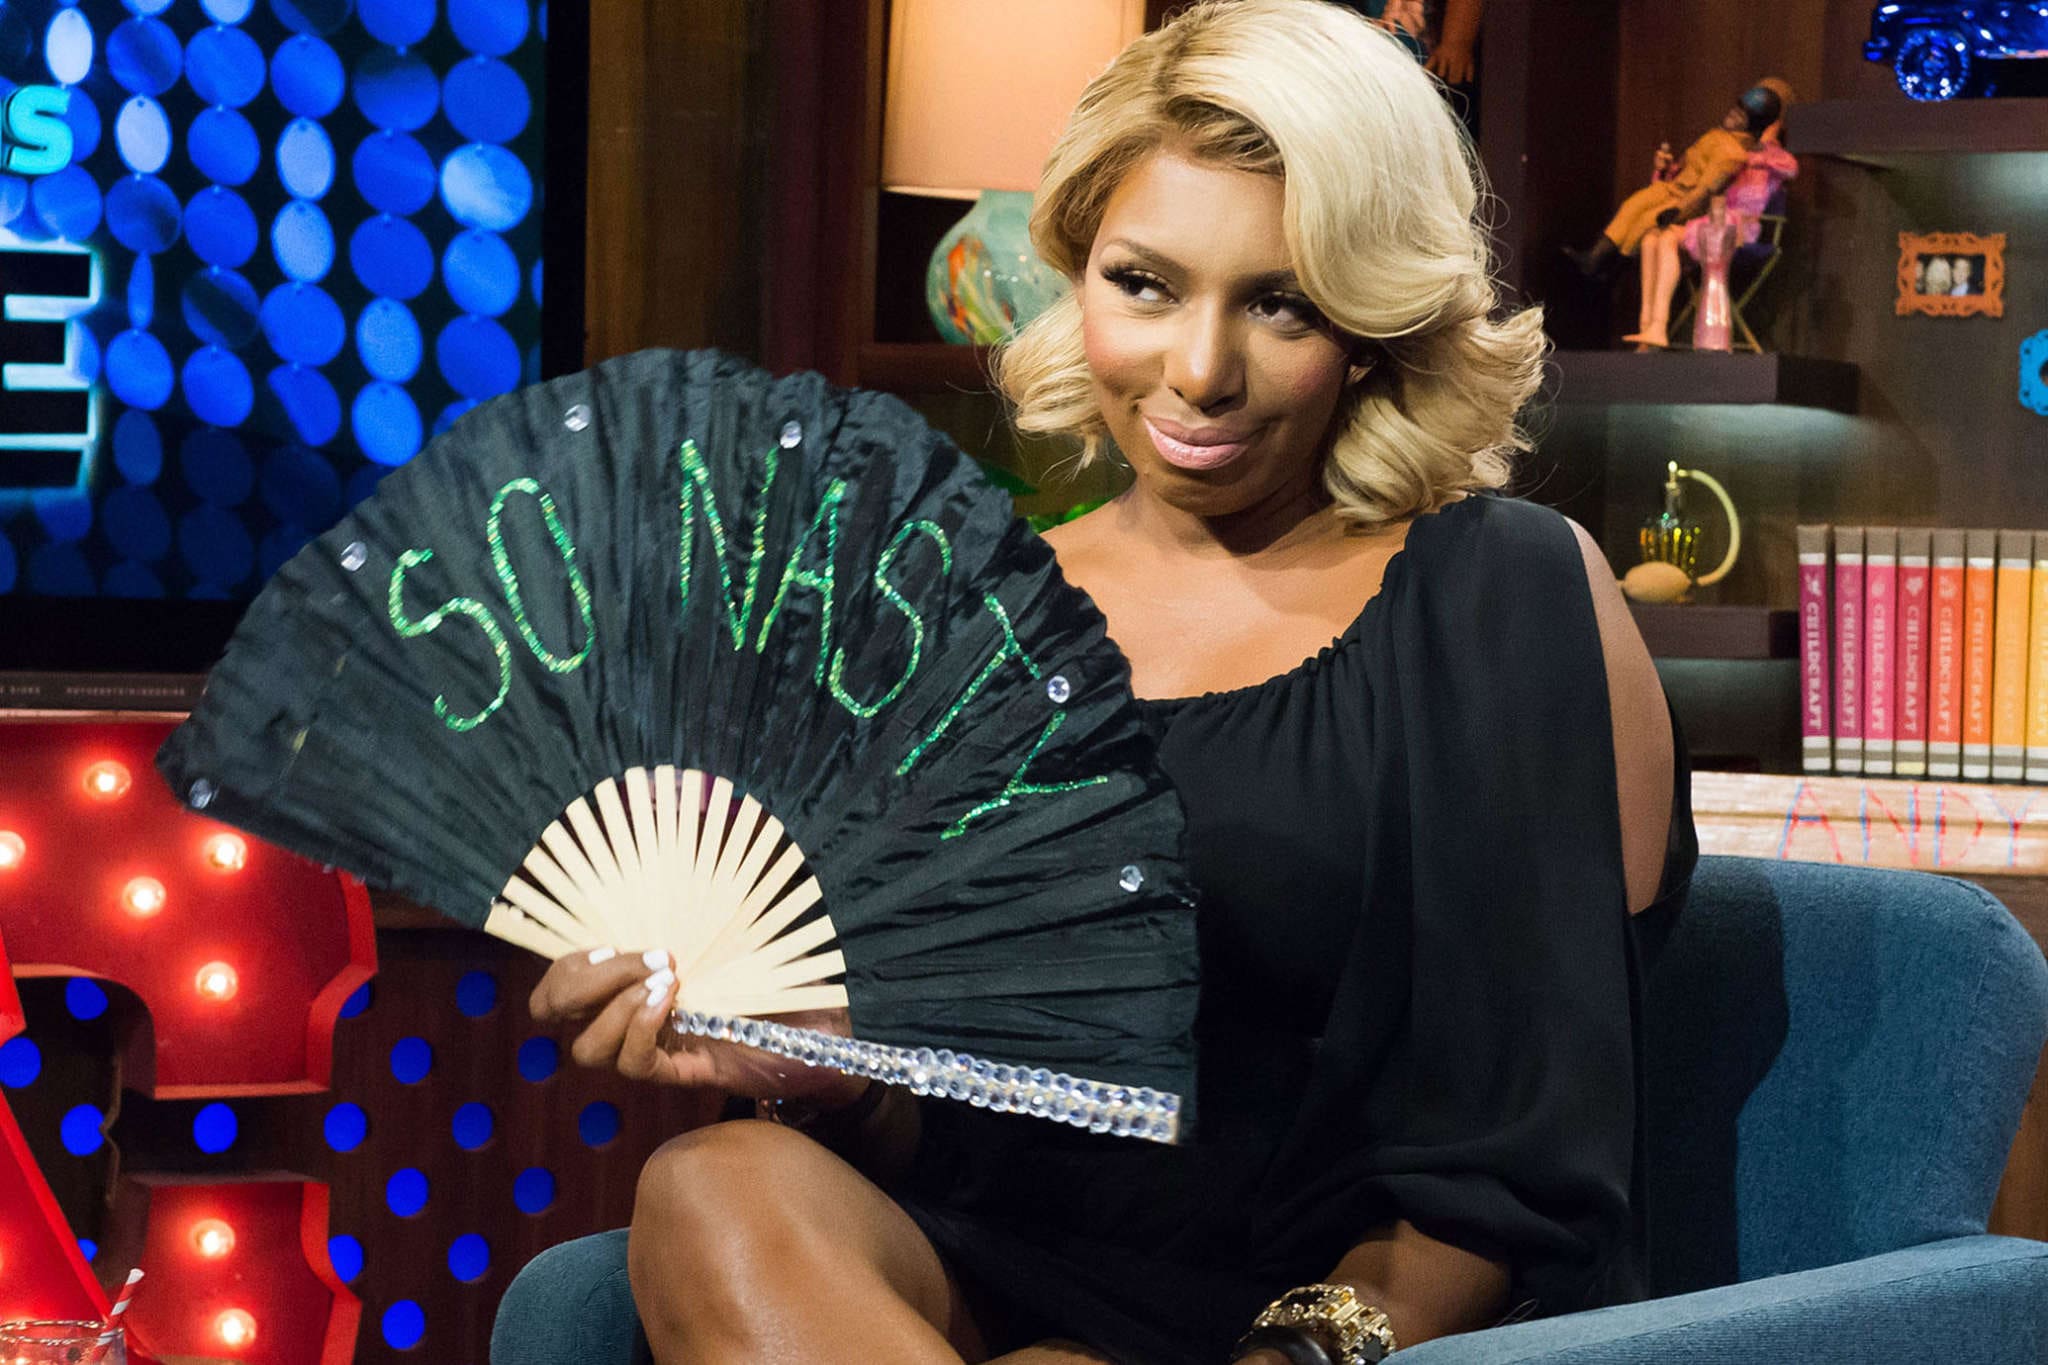 NeNe Leakes' First Day Of Her 'Ladies Of Success' Event Was Amazing - See Her Photos